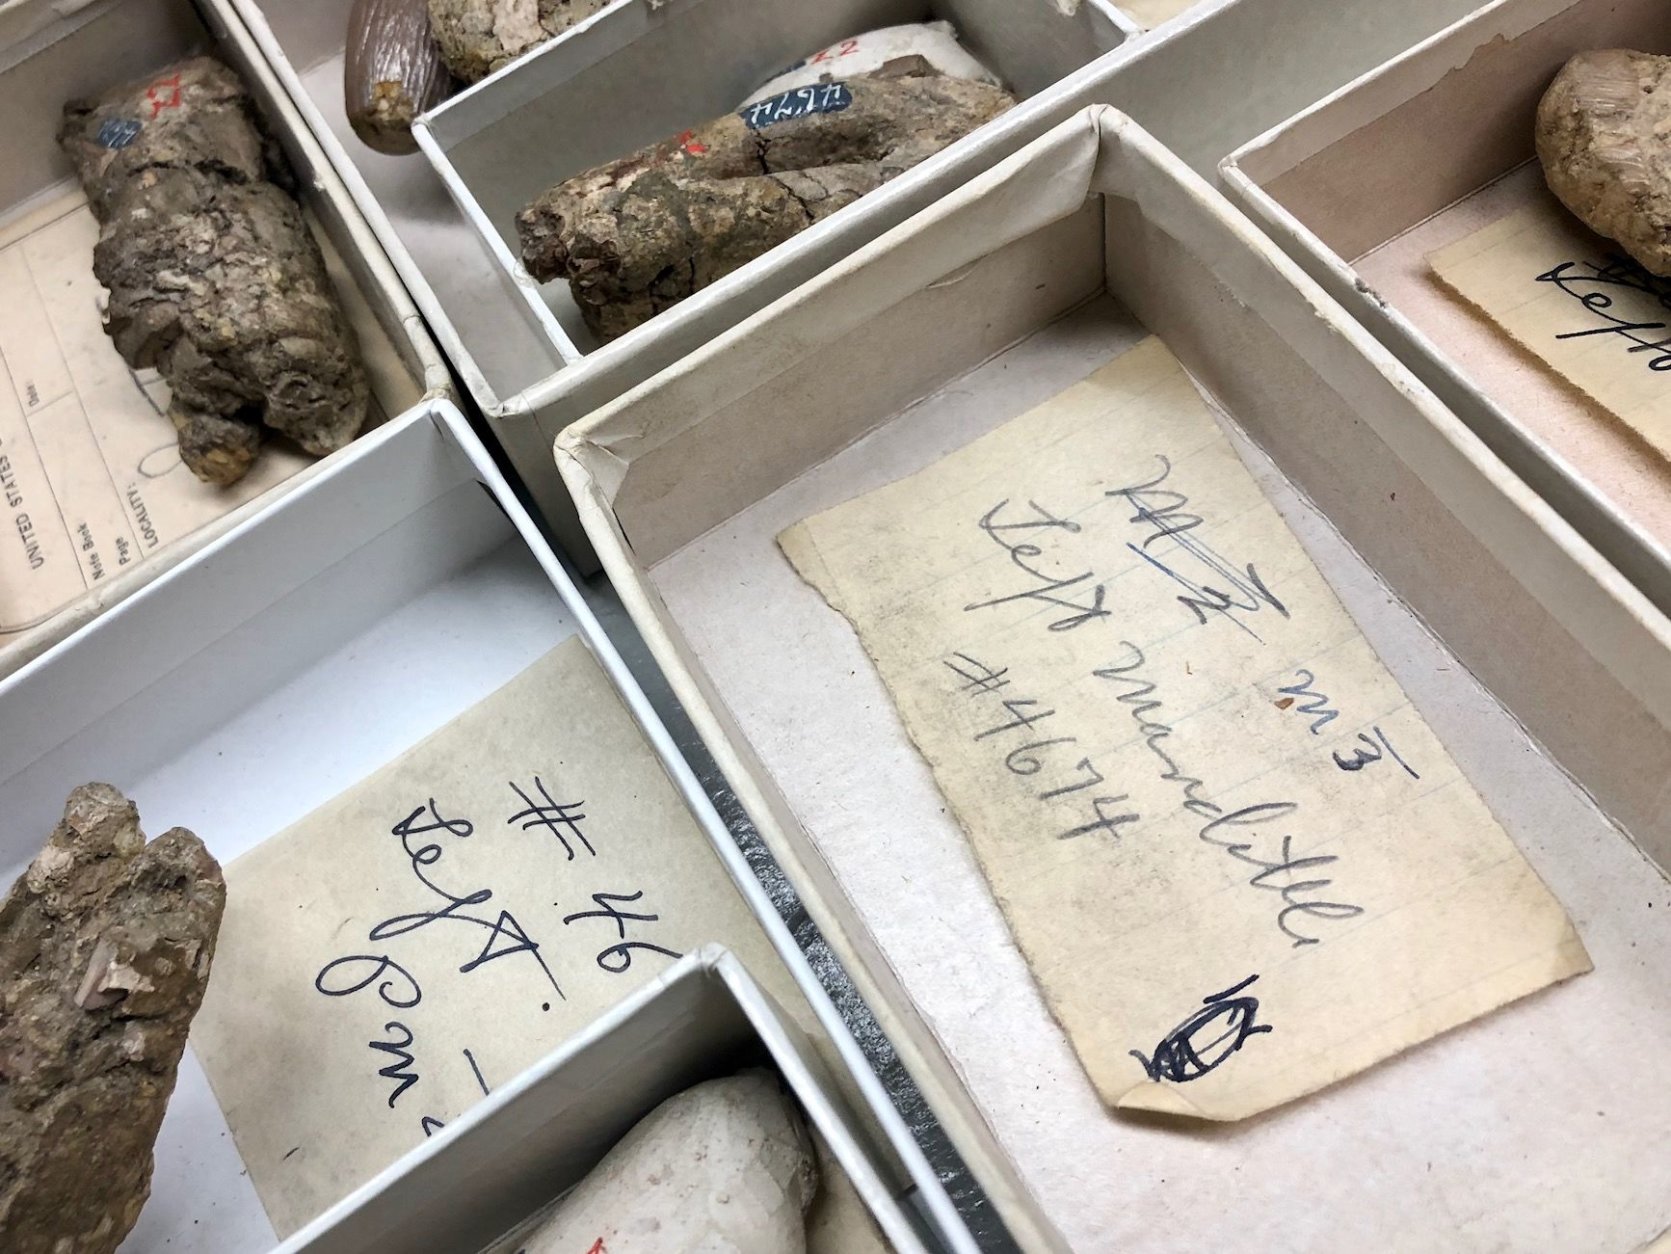 Left behind in some of the fossil records are the notes of Remington Kellogg, former curator at the Smithsonian and one of Nick Pyenson's predecessors. (WTOP/Megan Cloherty)